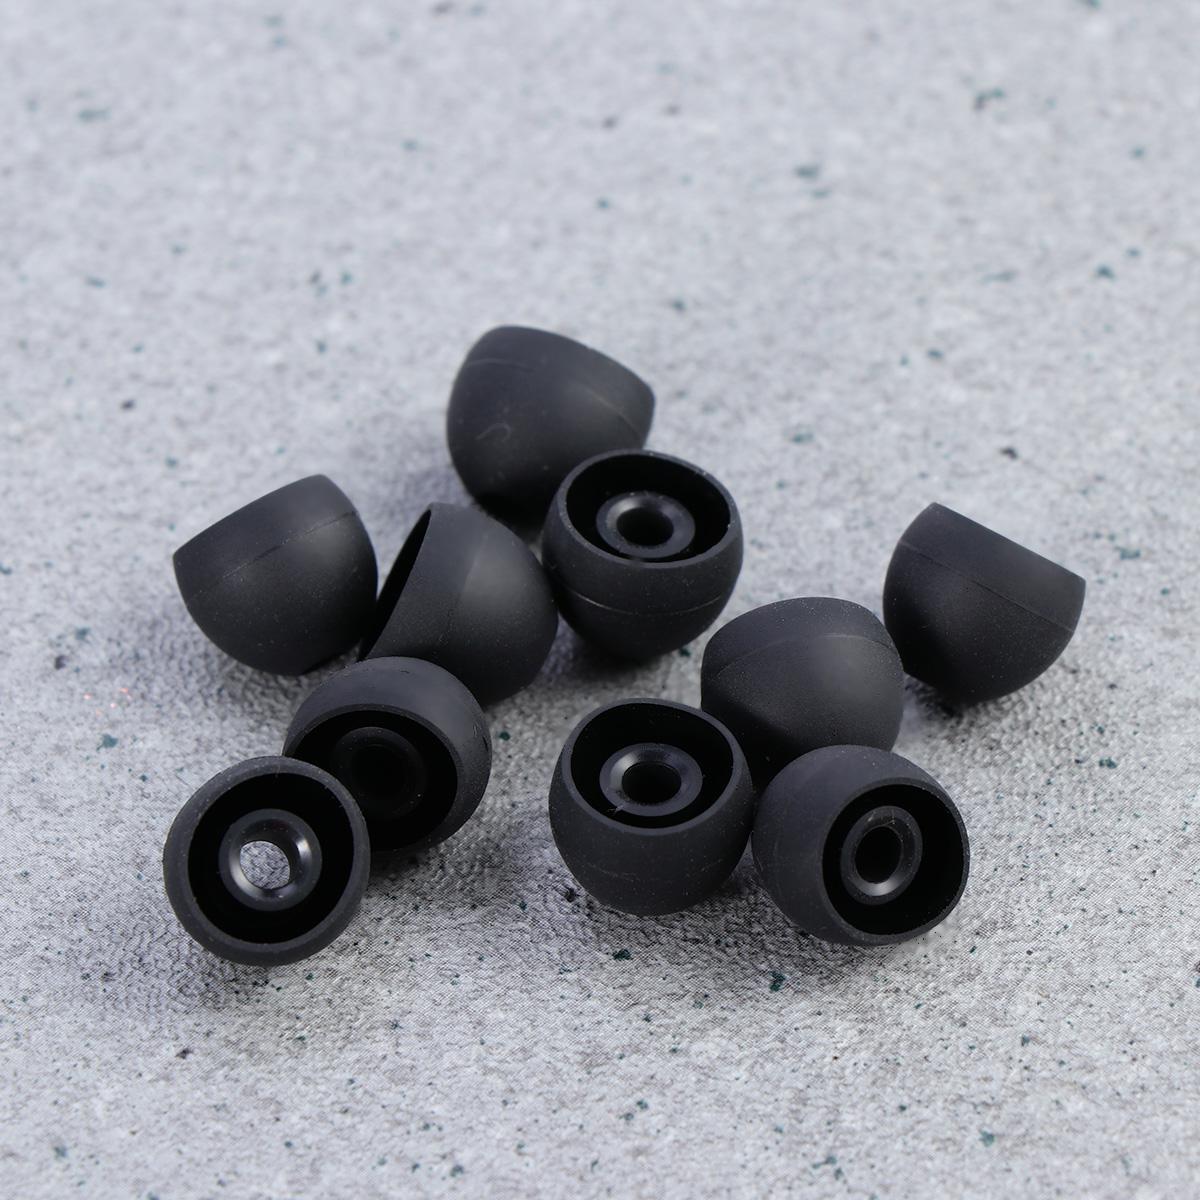 10pcs 13MM Replacement Earbuds Silicone Earphone Tips Noise Cancelling Earbud Caps (Black)